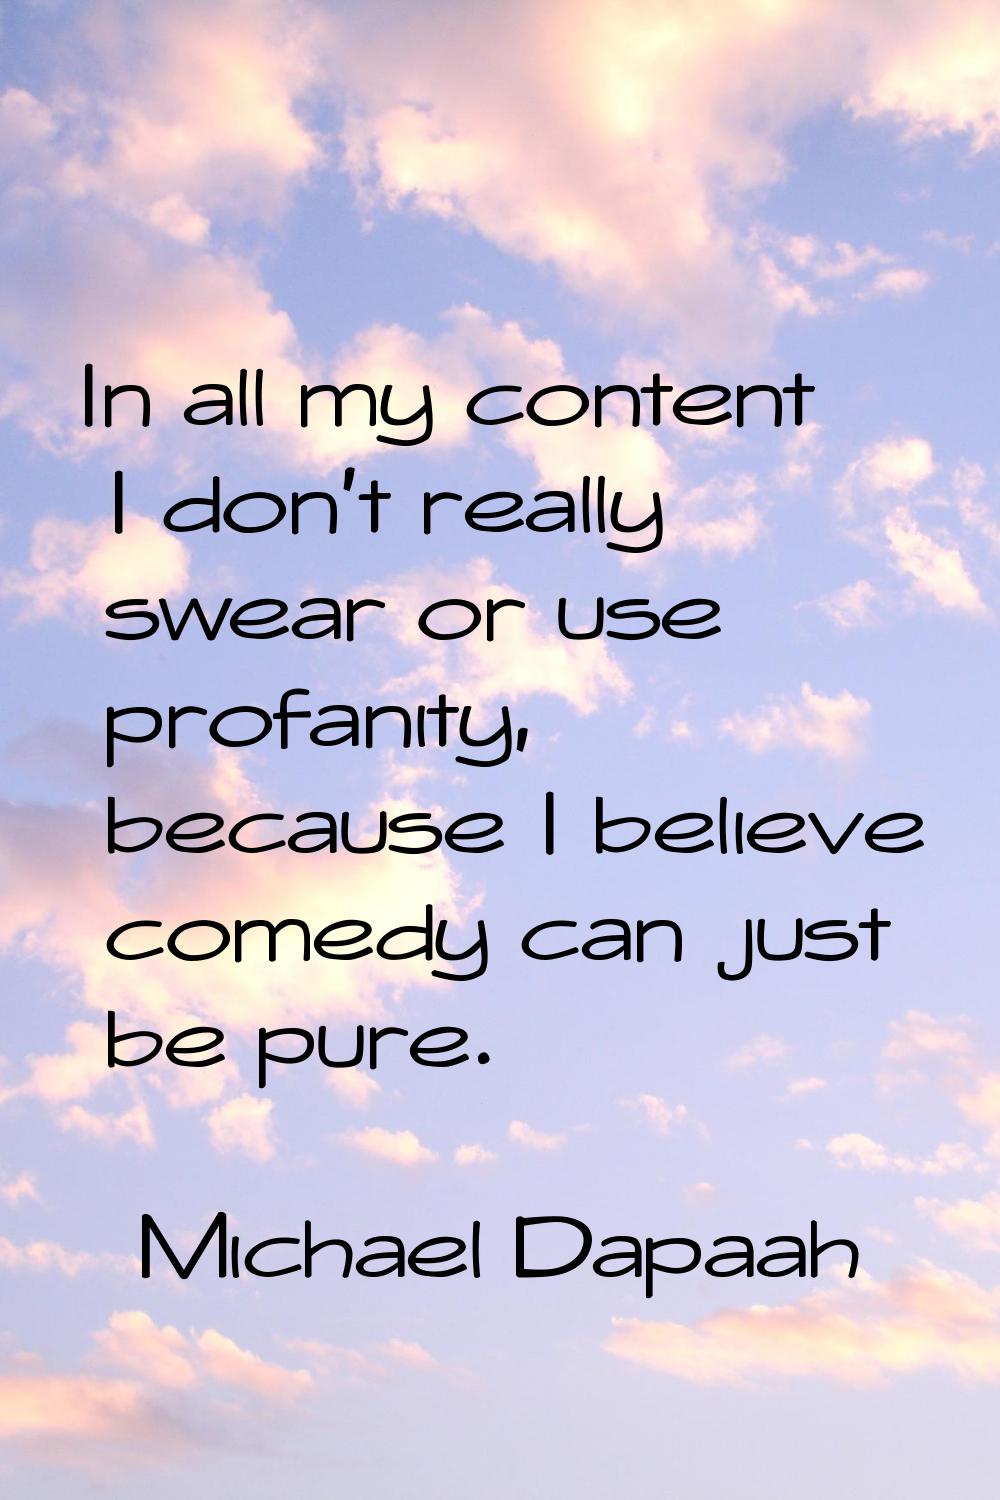 In all my content I don't really swear or use profanity, because I believe comedy can just be pure.